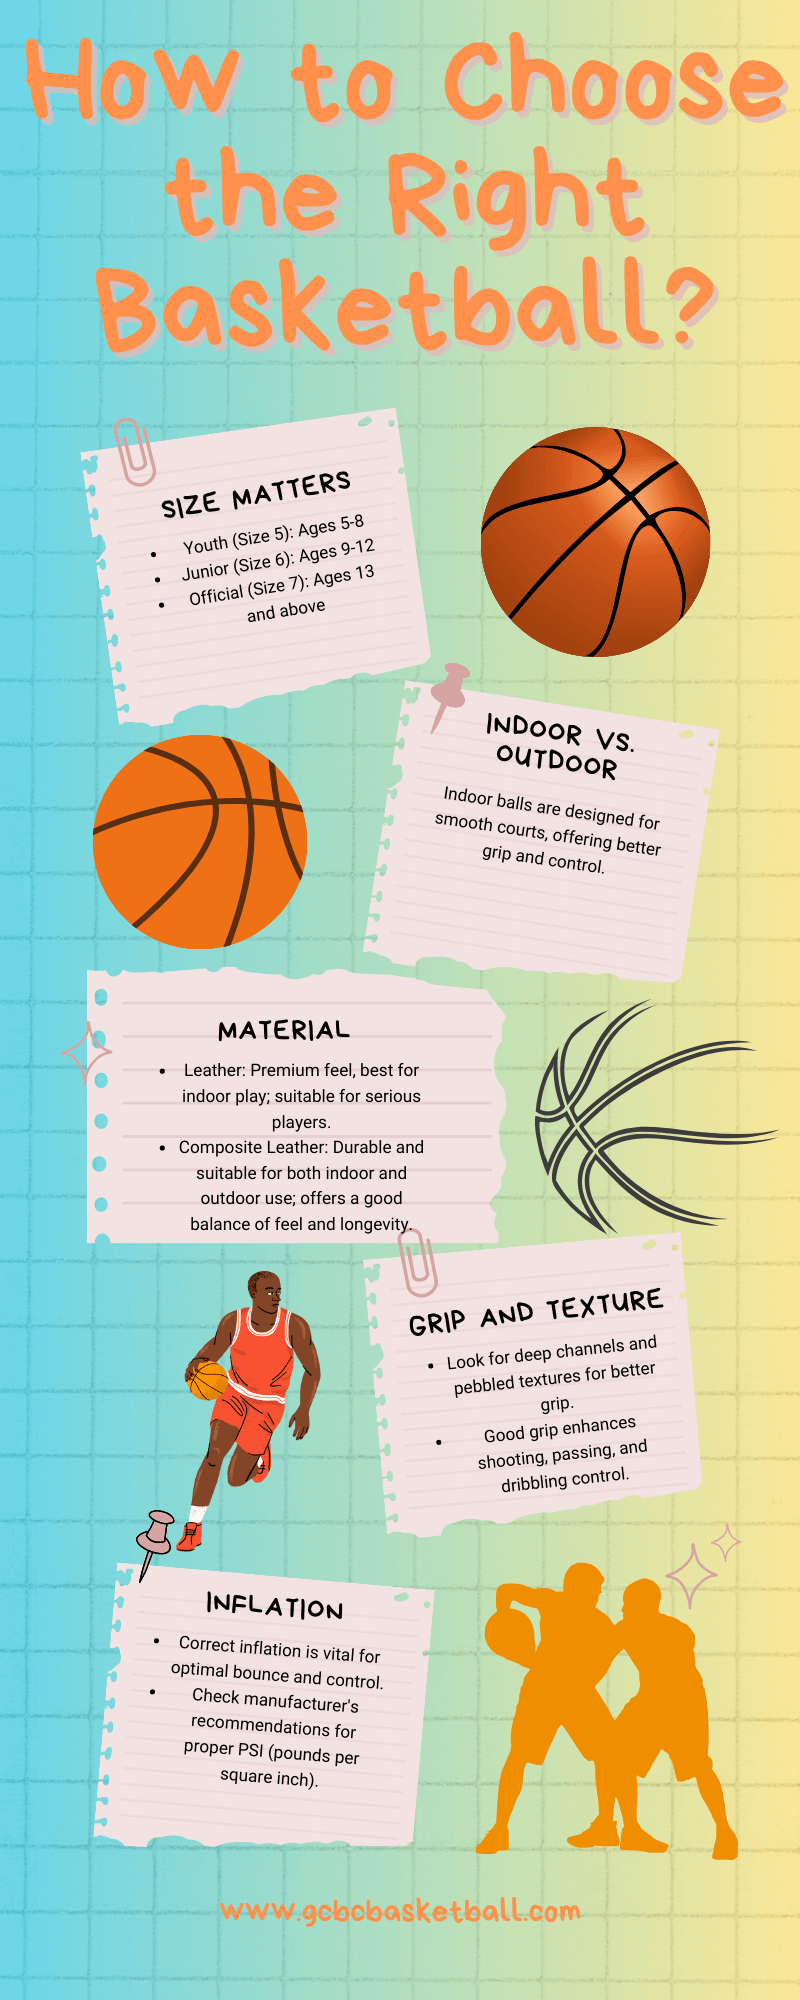 How To Choose The Right Basketball? - GCBCBasketball Blog